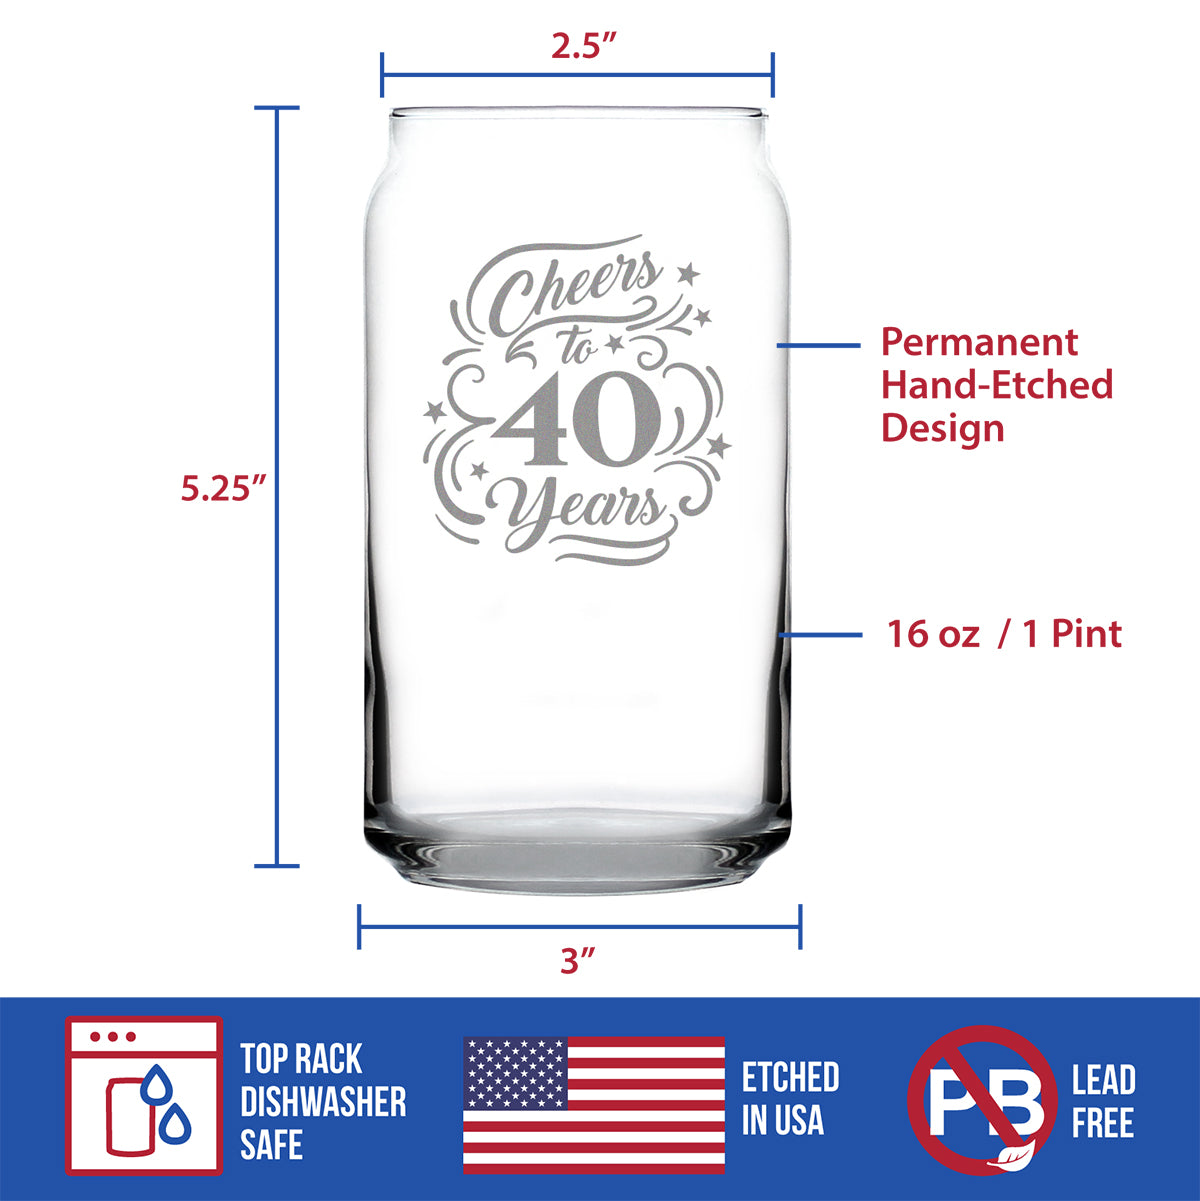 Cheers to 40 Years - Beer Can Pint Glass Gifts for Women &amp; Men - 40th Anniversary Party Decor - 16 Oz Glasses